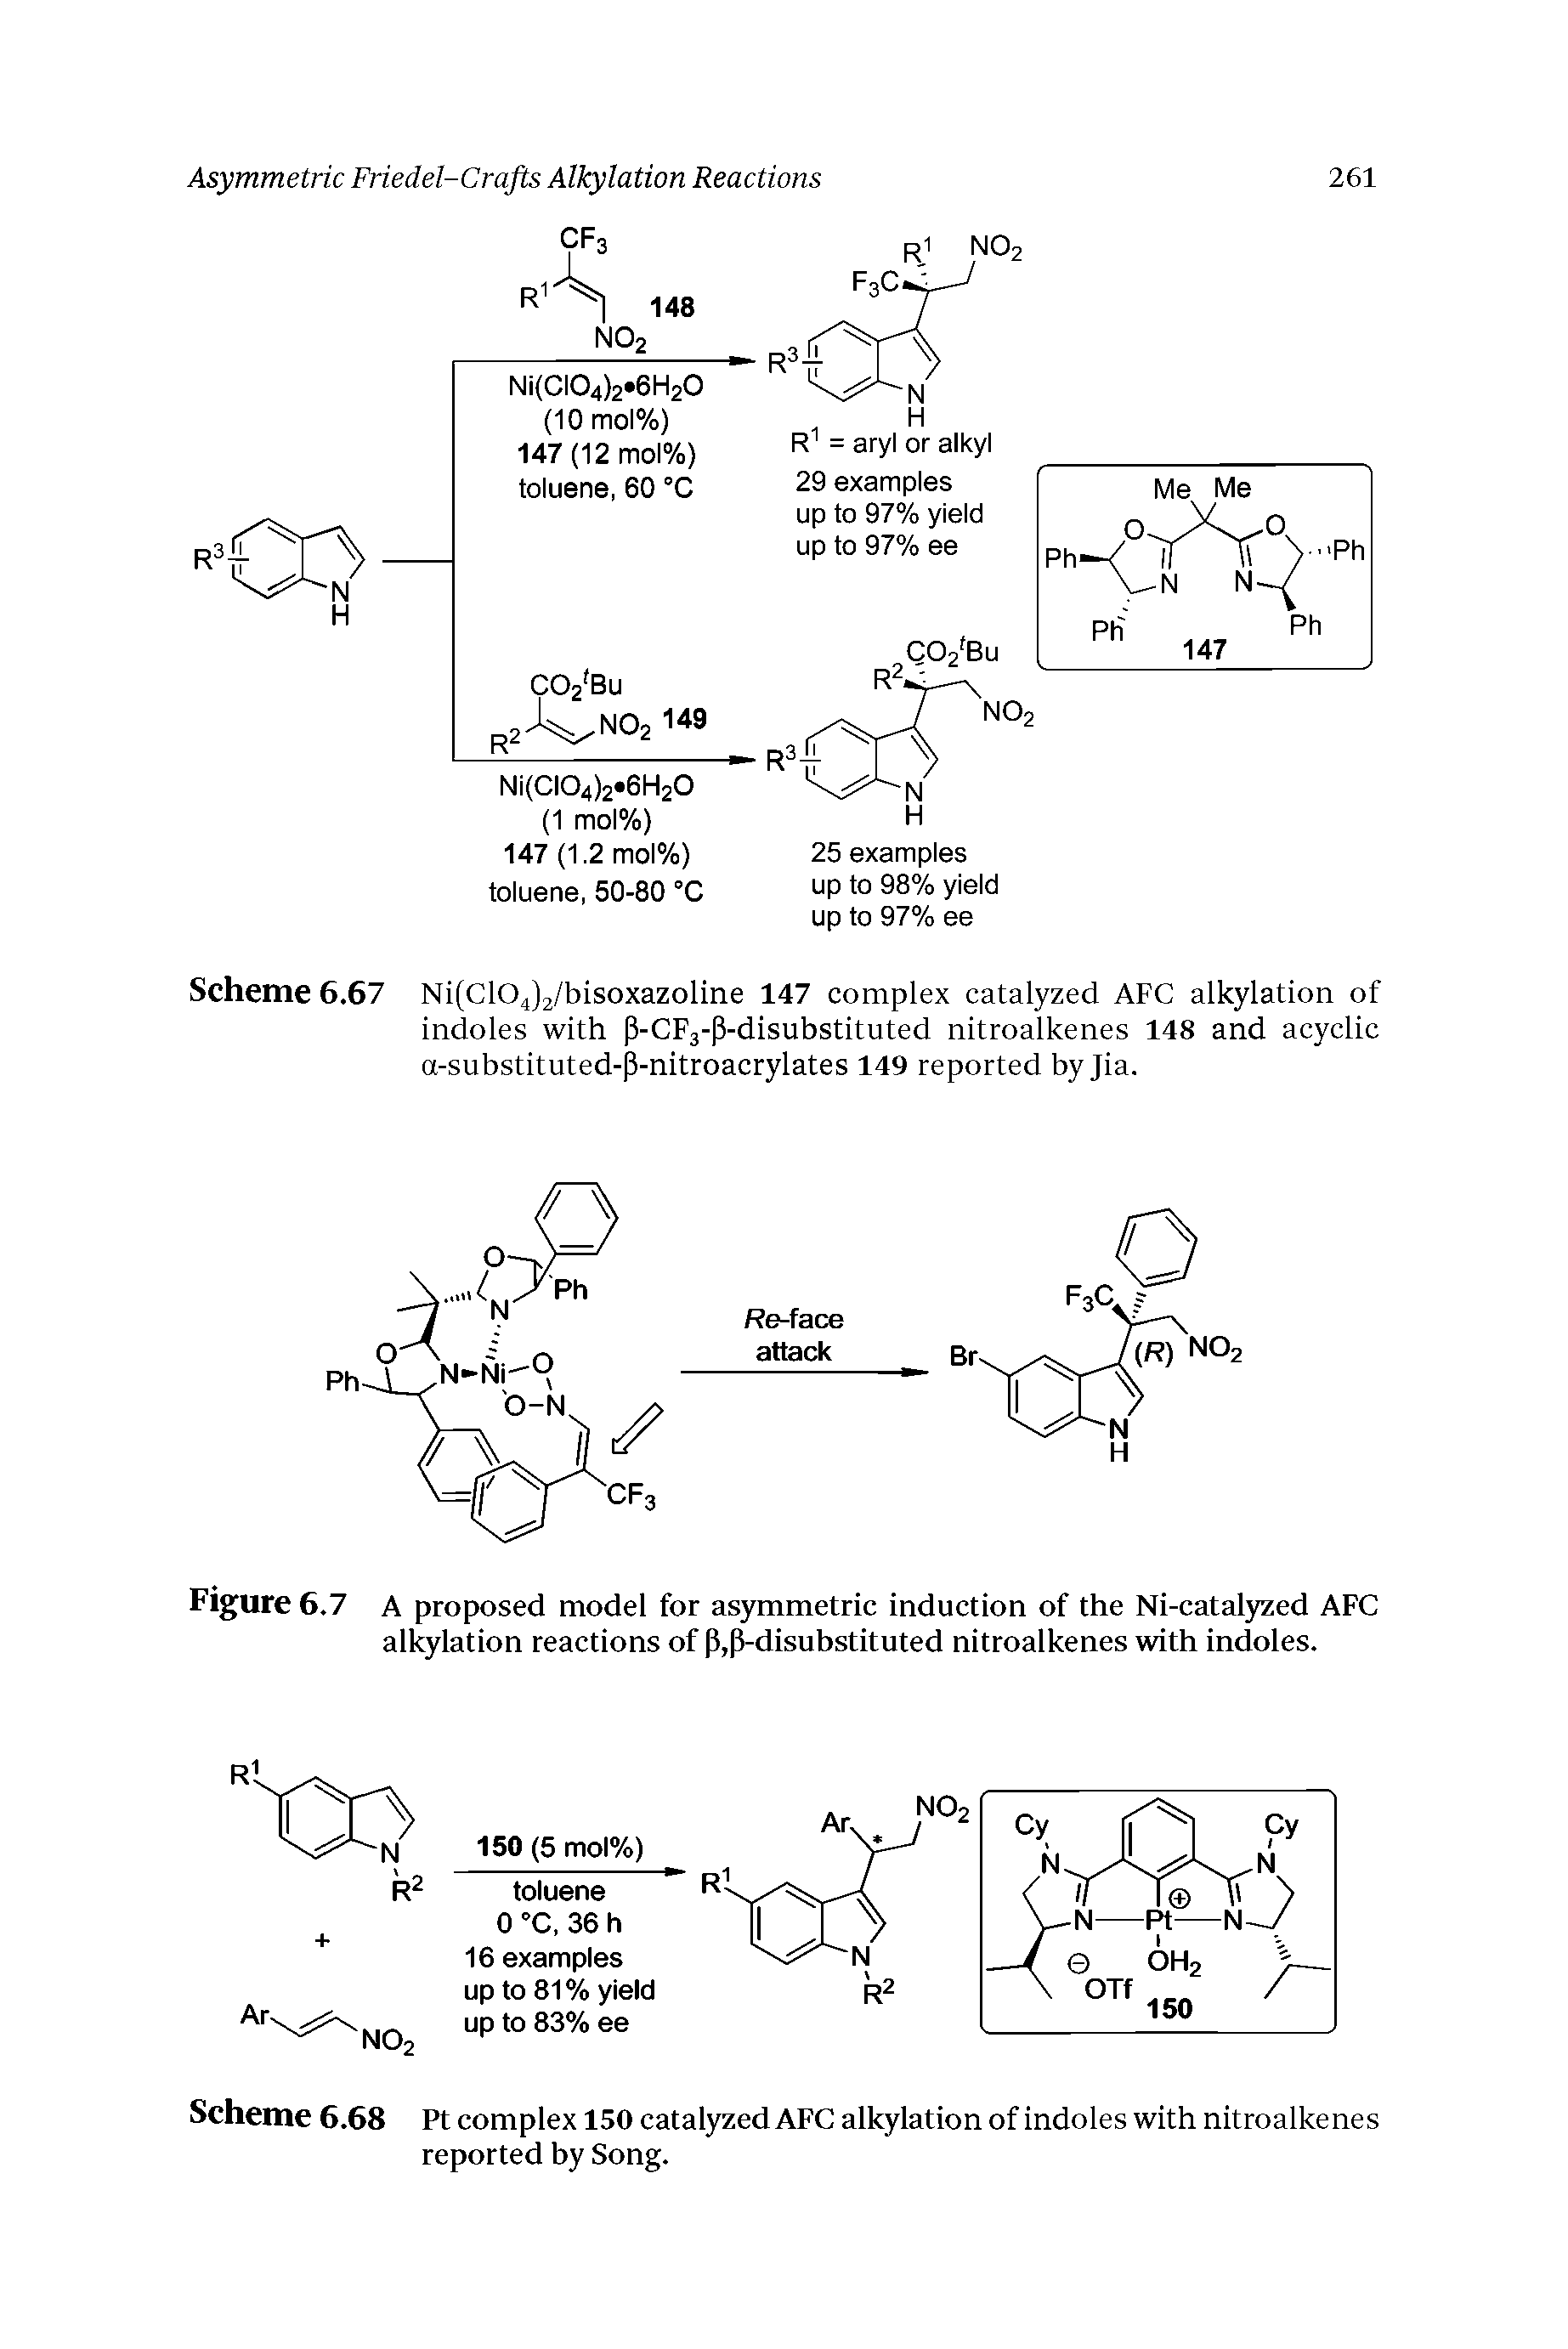 Figure 6.7 A proposed model for asymmetric induction of the Ni-catalyzed AFC alkylation reactions of p,p-disubstituted nitroalkenes with indoles.